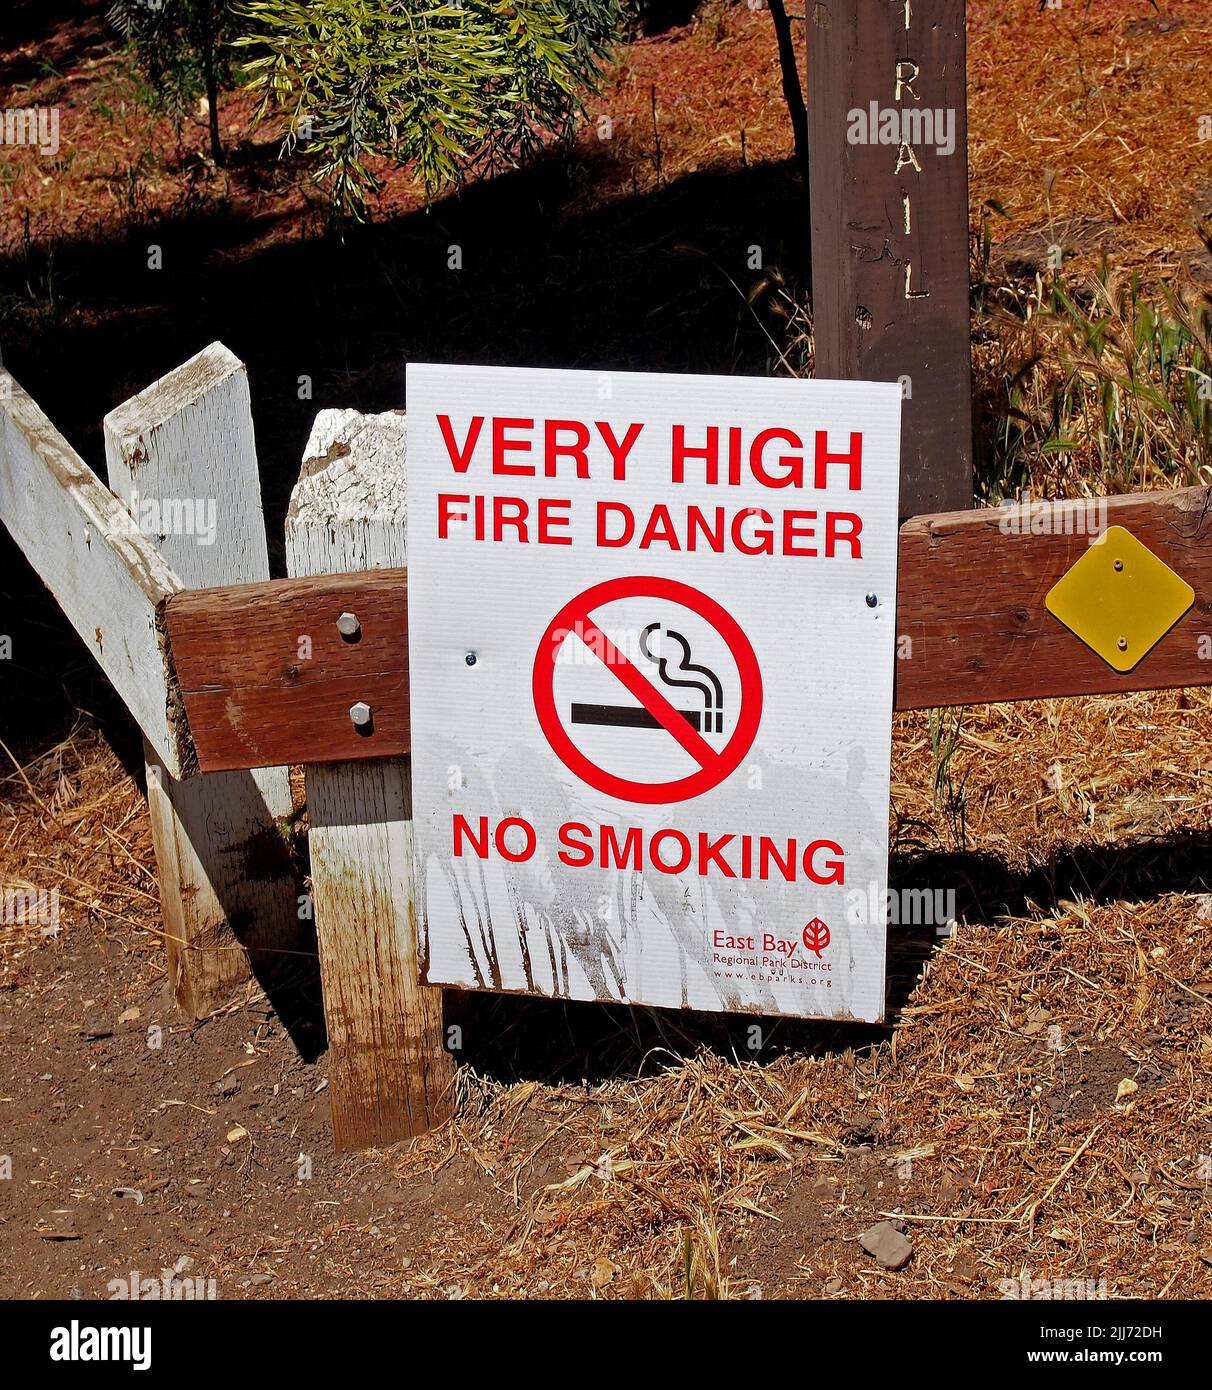 very high fire danger, no smoking, warning sign in an East Bay Regional Park, California Stock Photo